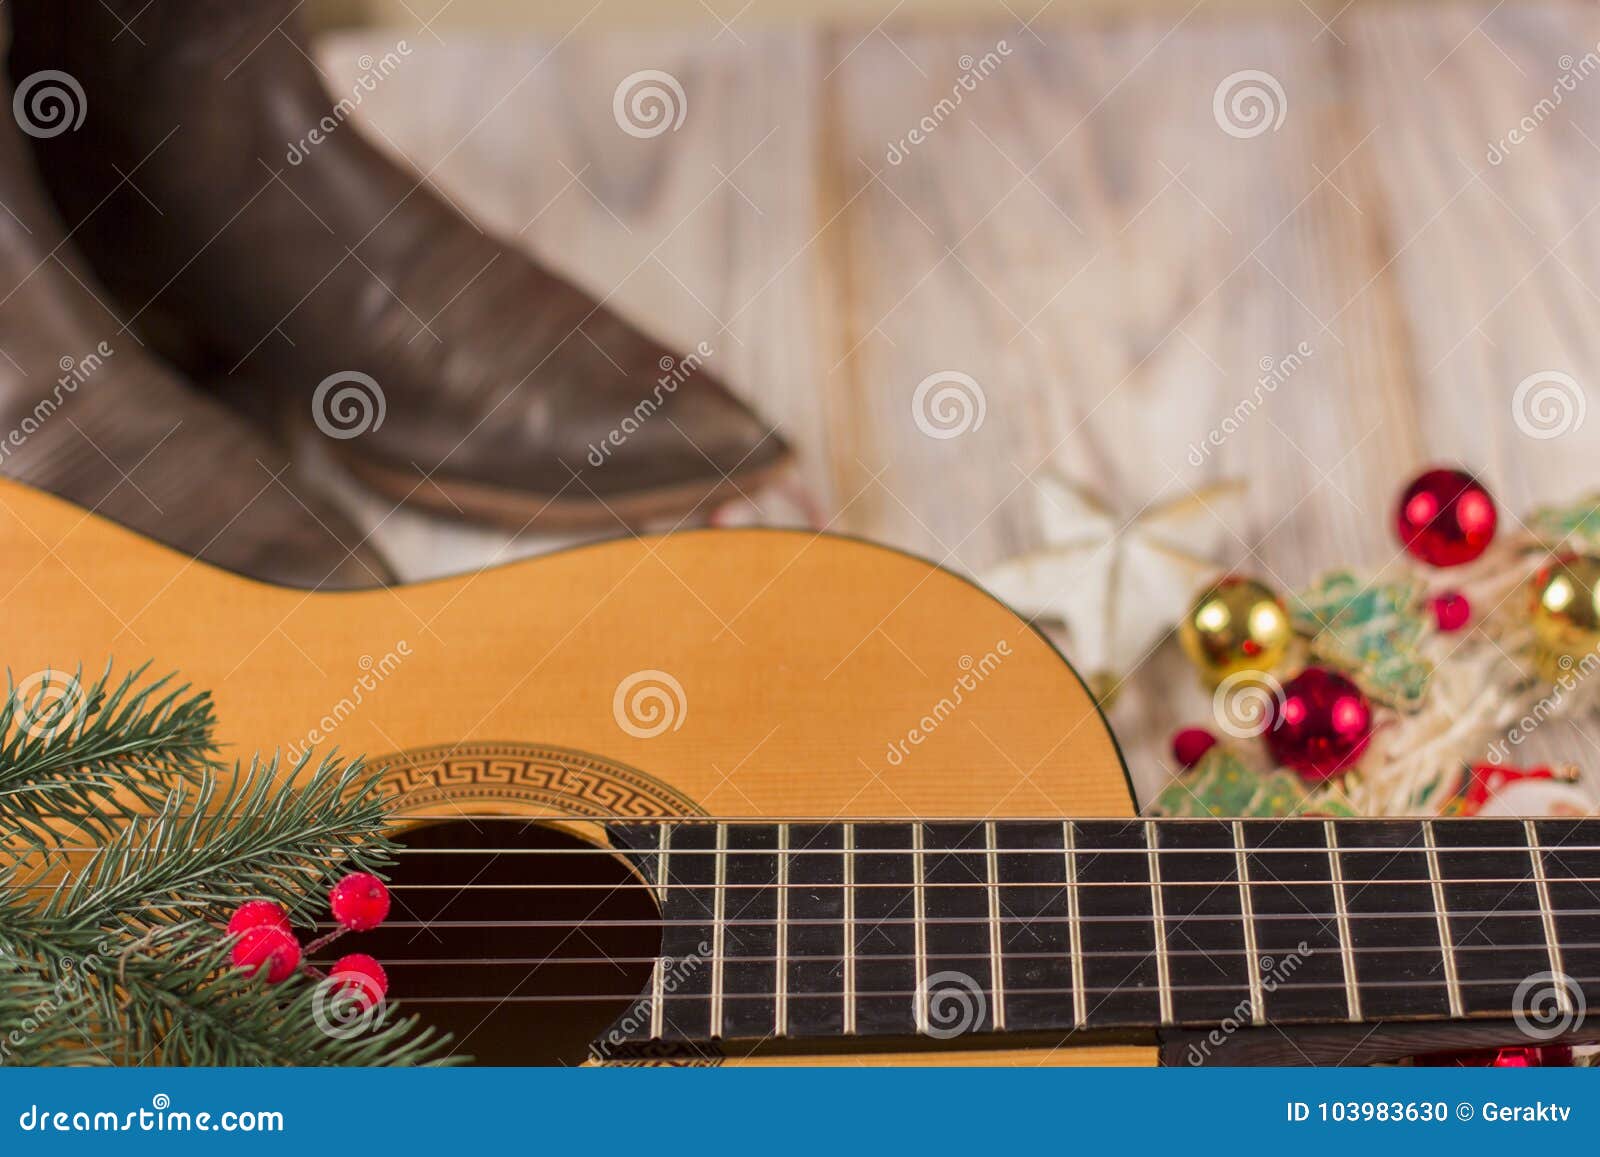 Christmas Music Background With Acoustic Guitar And Holiday Decoration Stock Photo Image Of Cowboy American 103983630